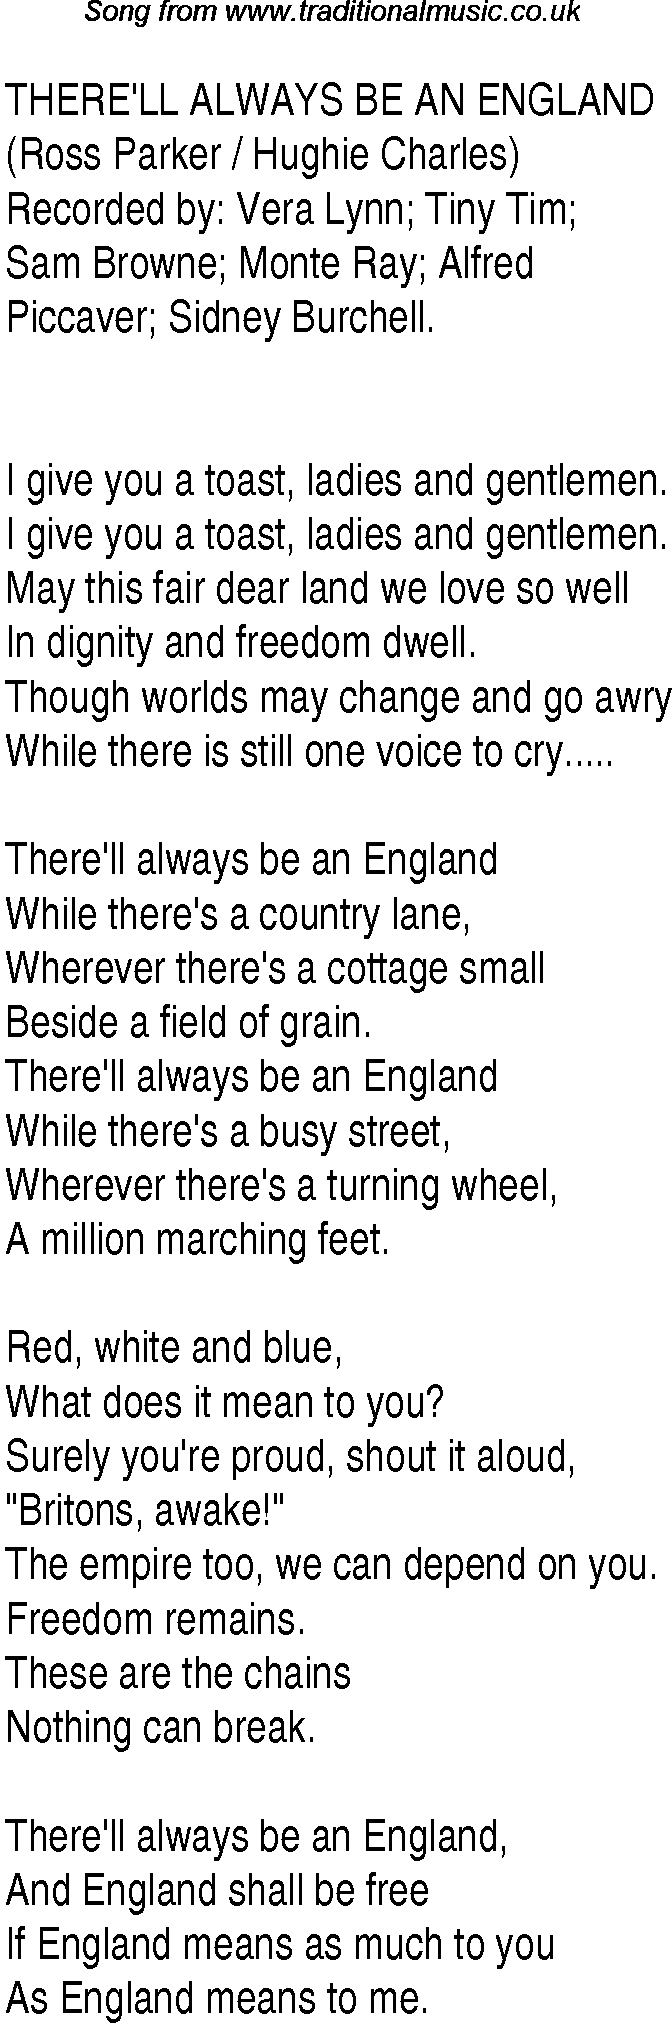 1940s top songs - lyrics for There'll Always Be An England